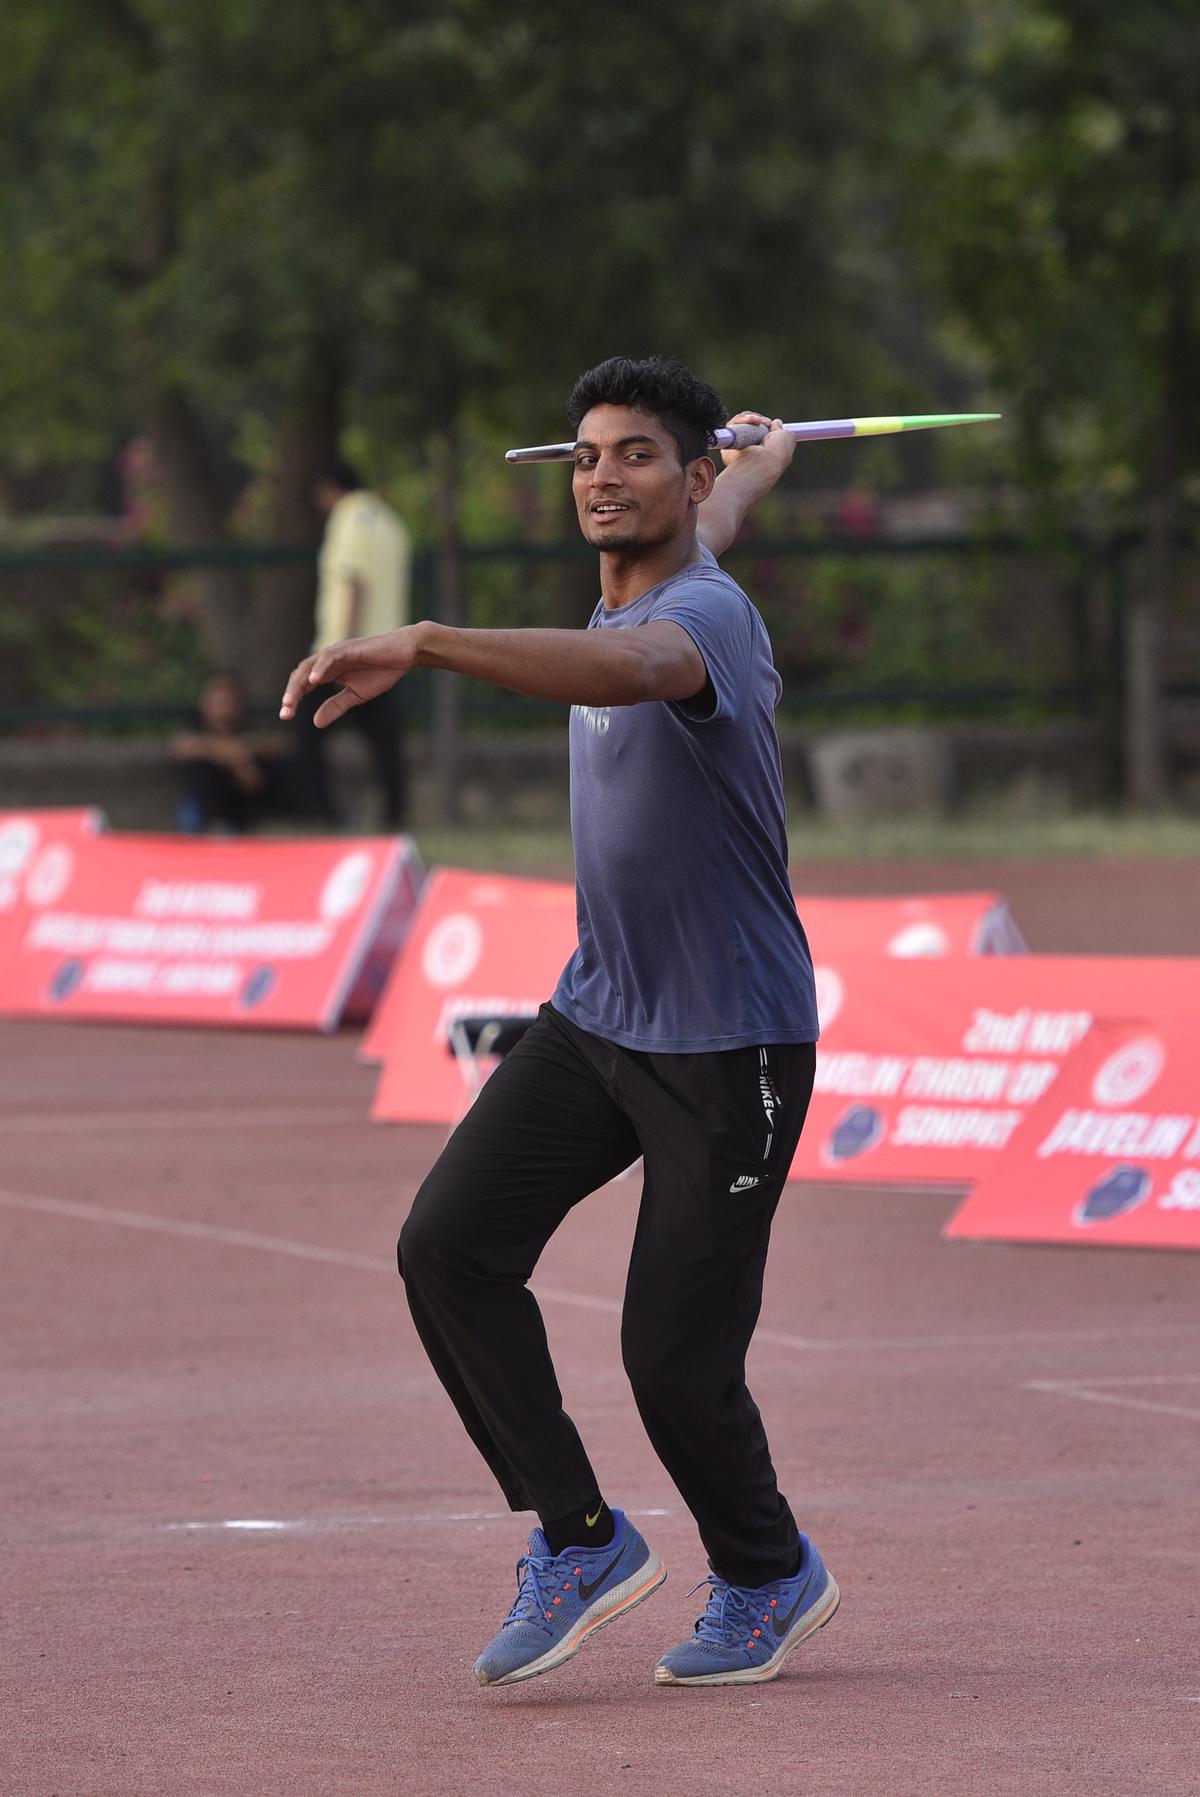 Personal best: Rohit Yadav’s effort of 82.54m won him the silver at the inter-State Nationals in Chennai recently. 